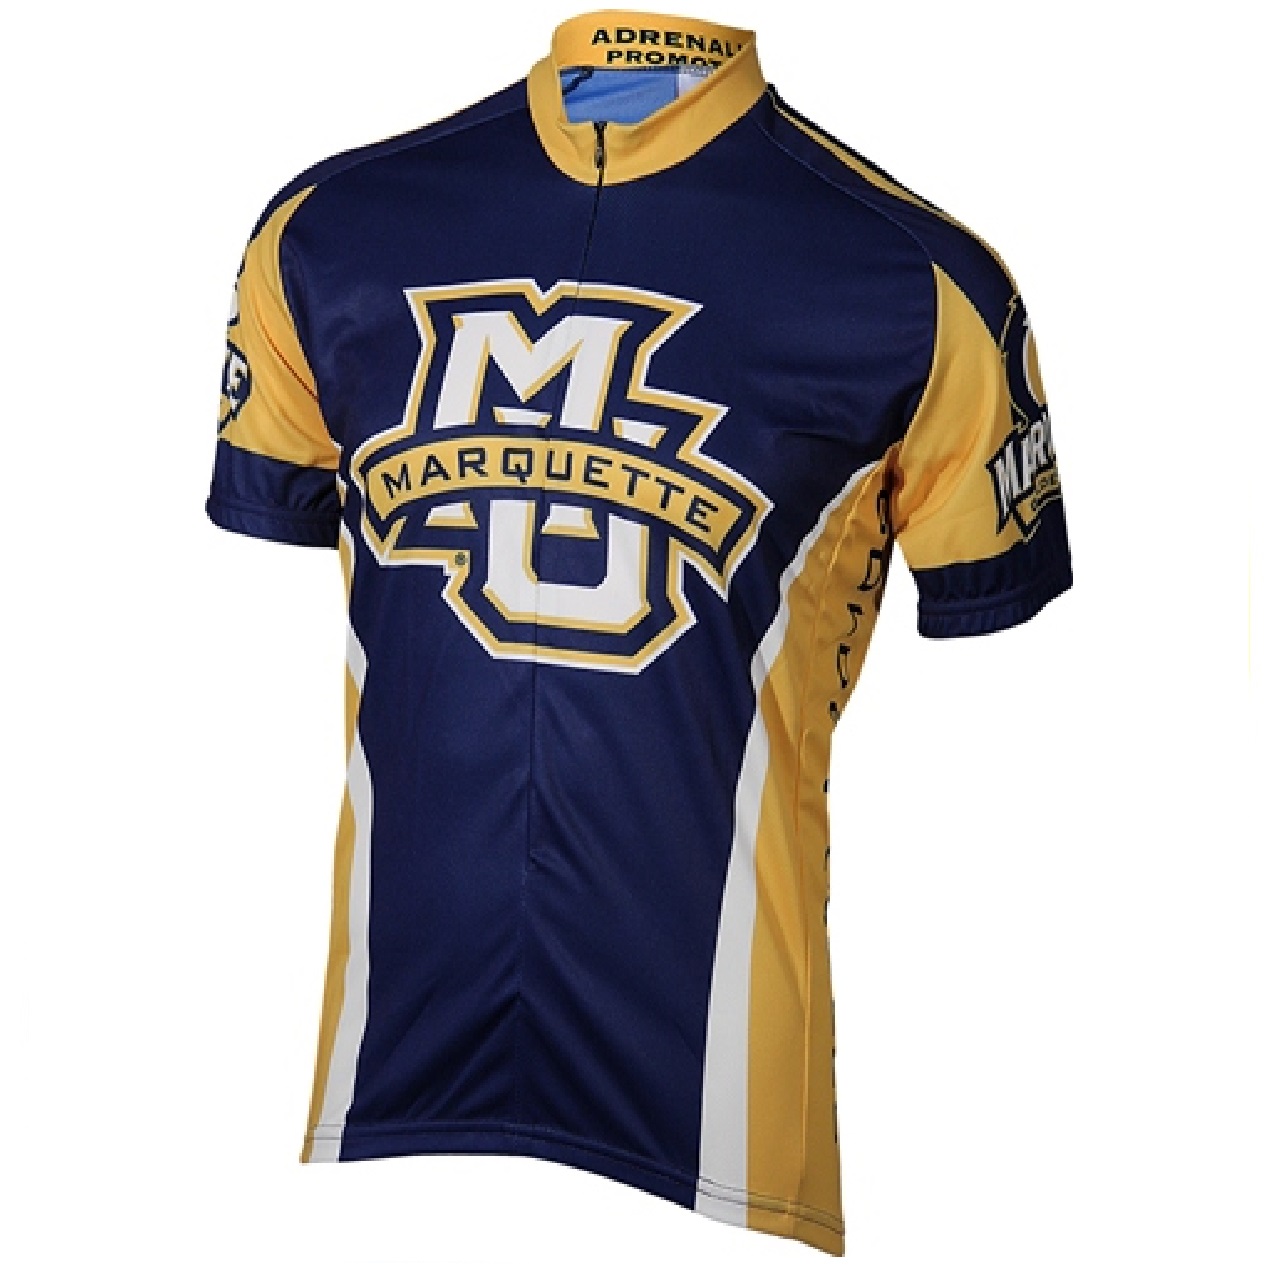 Adrenaline Promo Marquette University College  Road Cycling Jersey